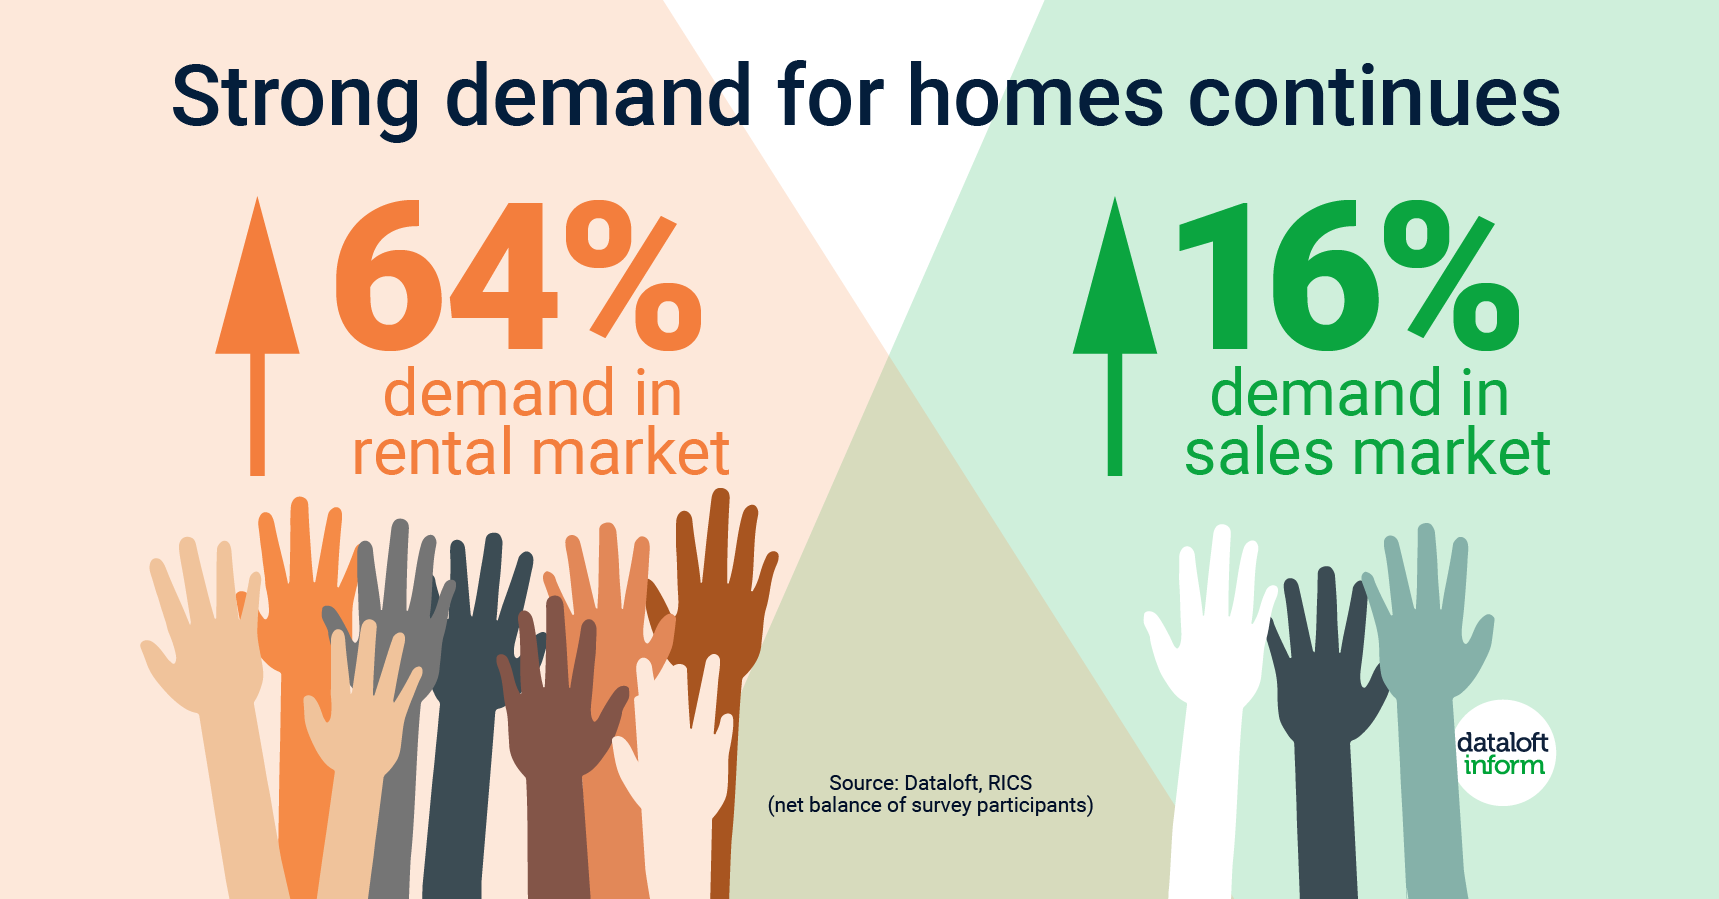 Strong demand for homes continues